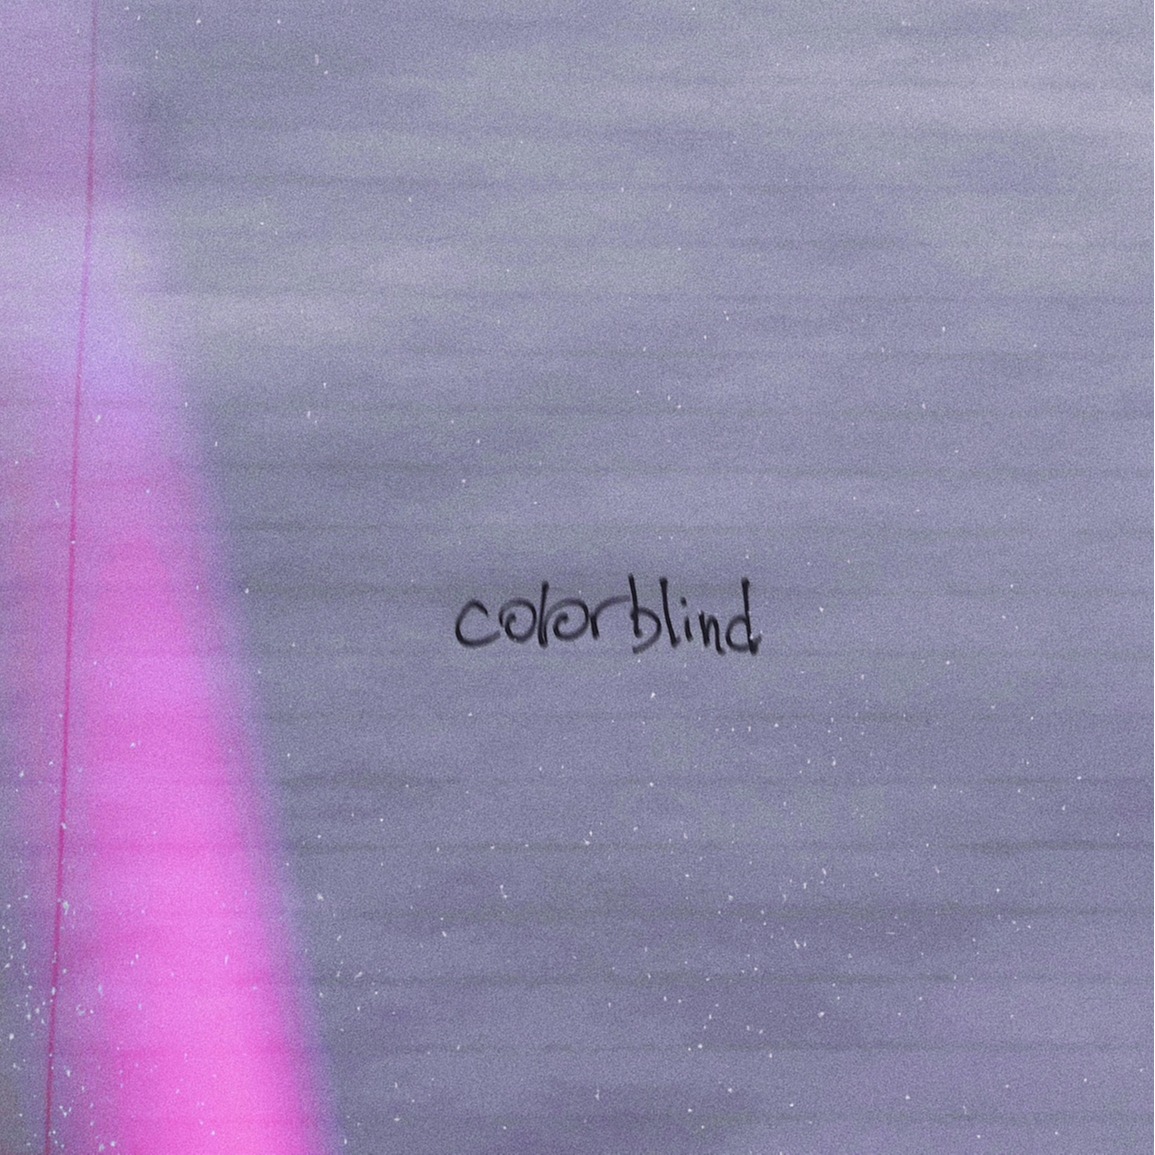 COLORBLIND.